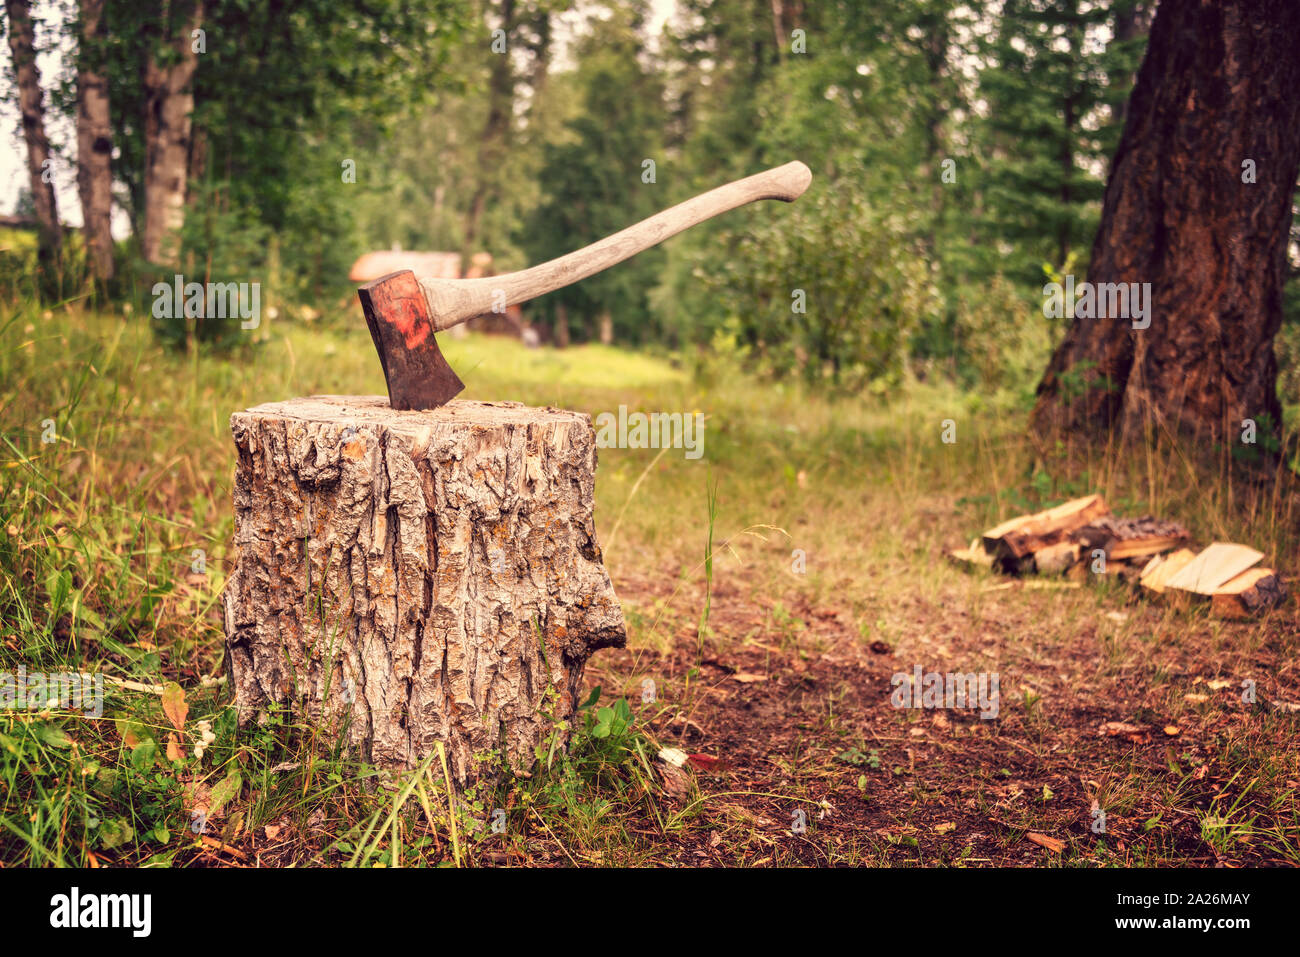 Vintage axe stuck in a wooden stump in a forest. Cutting trees and chopping frewood for winter concept Stock Photo